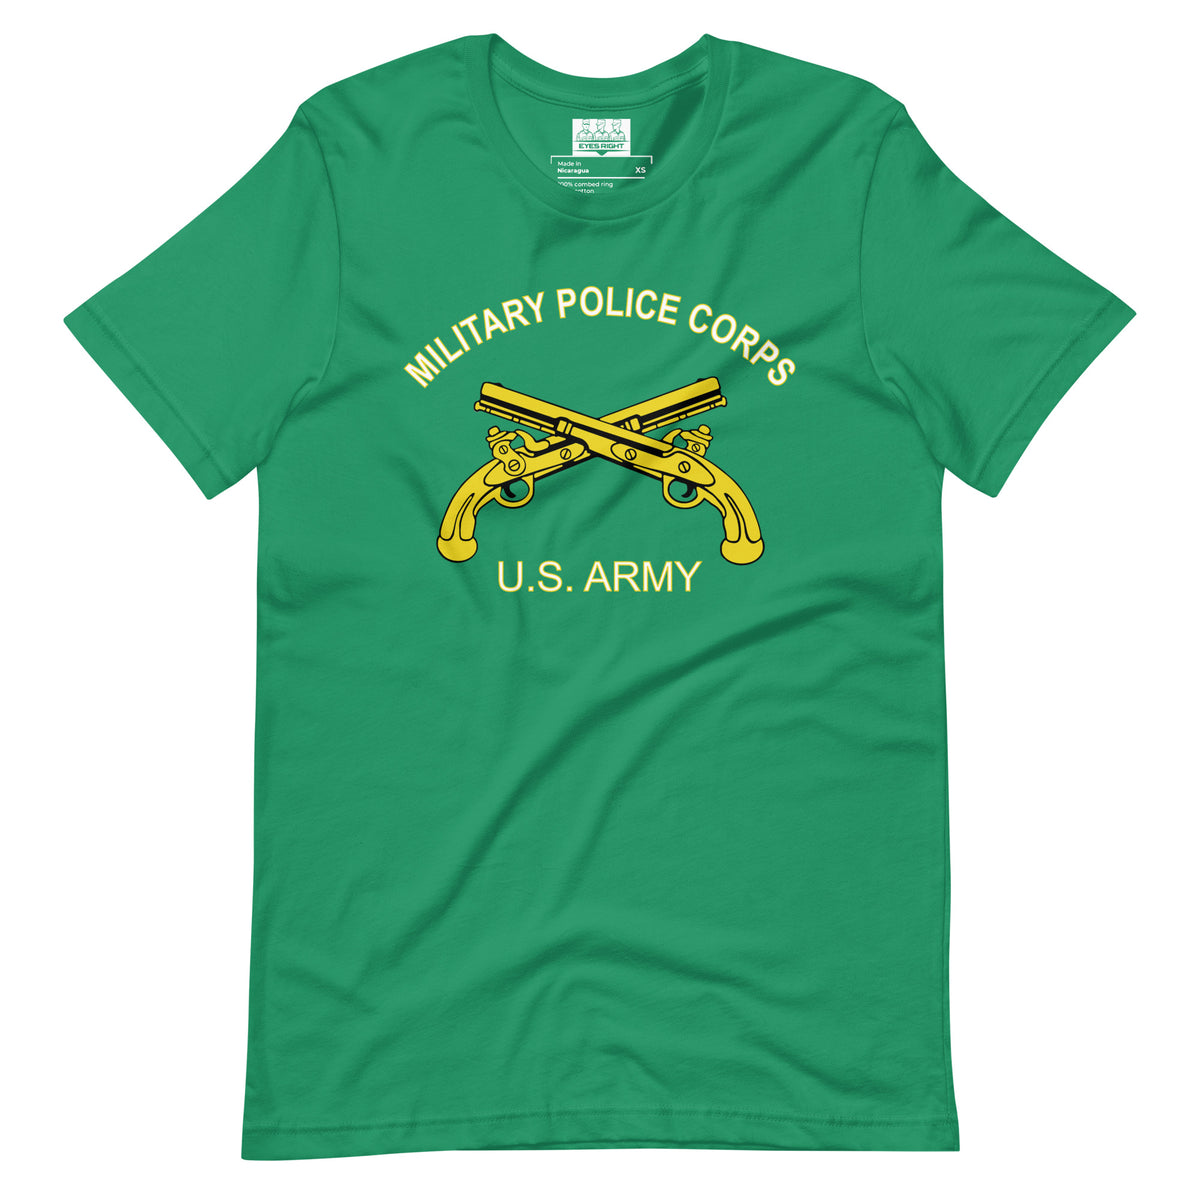 Military Police Corps T-Shirt